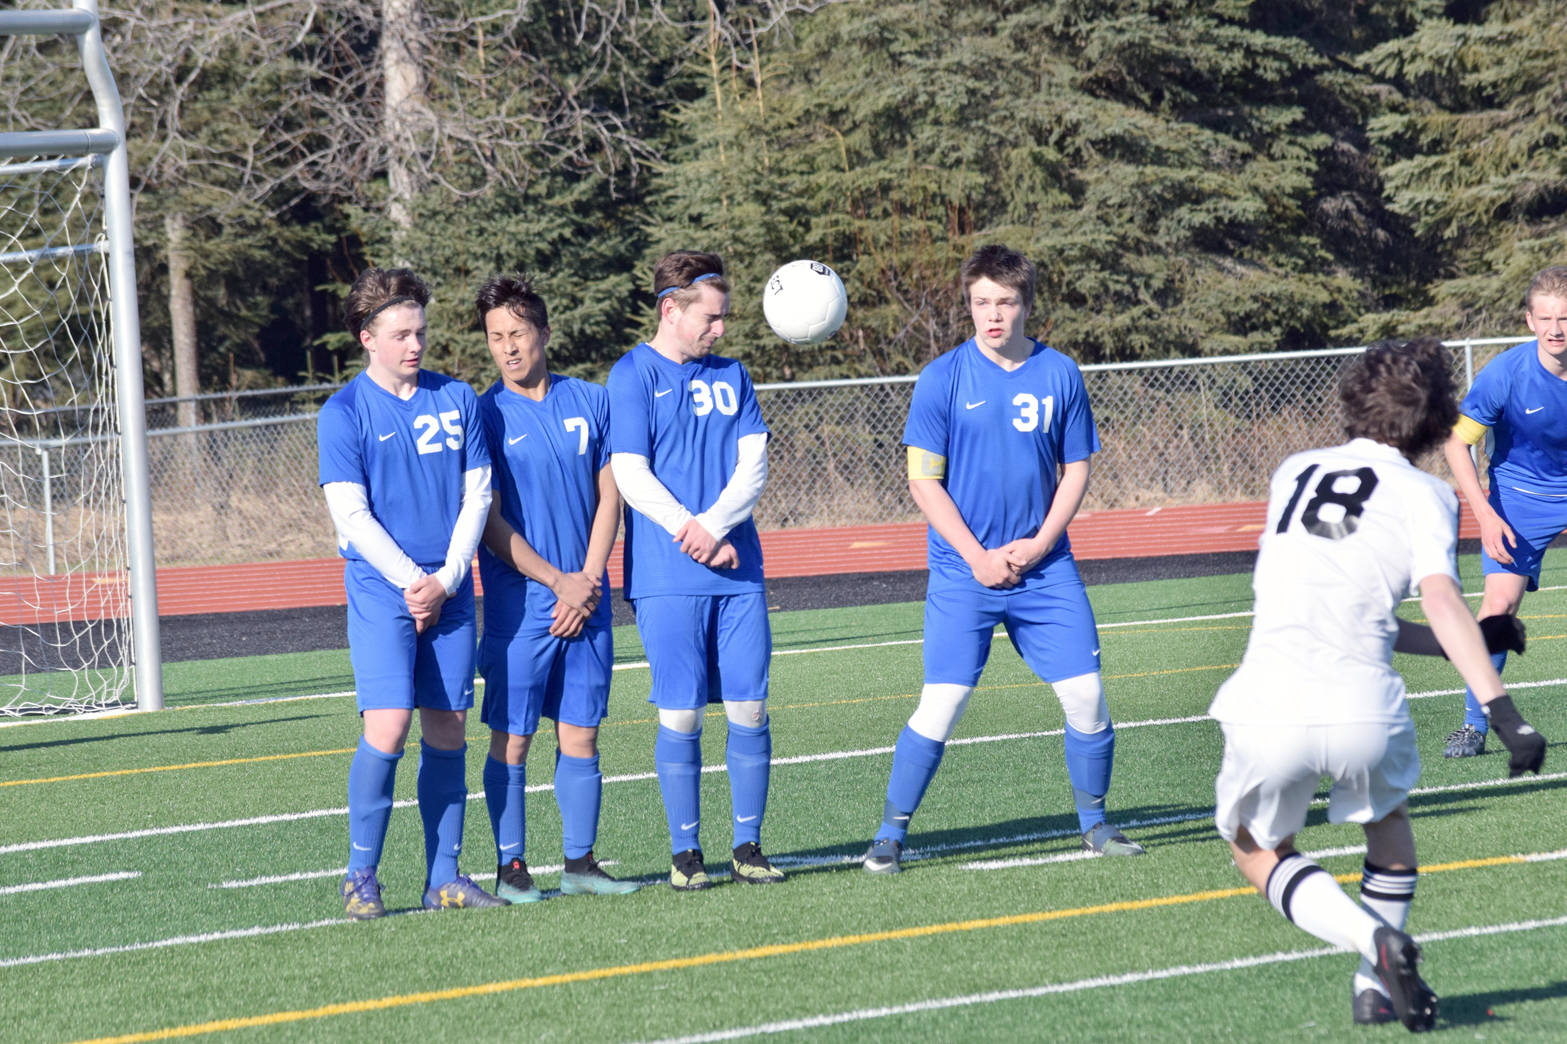 Kenai Central’s Damien Redder successfully avoids the wall of Soldotna’s Cameron Johnson, Sean McMullen, Ethan Bott and Eli Sheridan, but can’t convert a free kick Tuesday, May 1, 2018, at Kenai Central High School. (Photo by Jeff Helminiak/Peninsula Clarion)